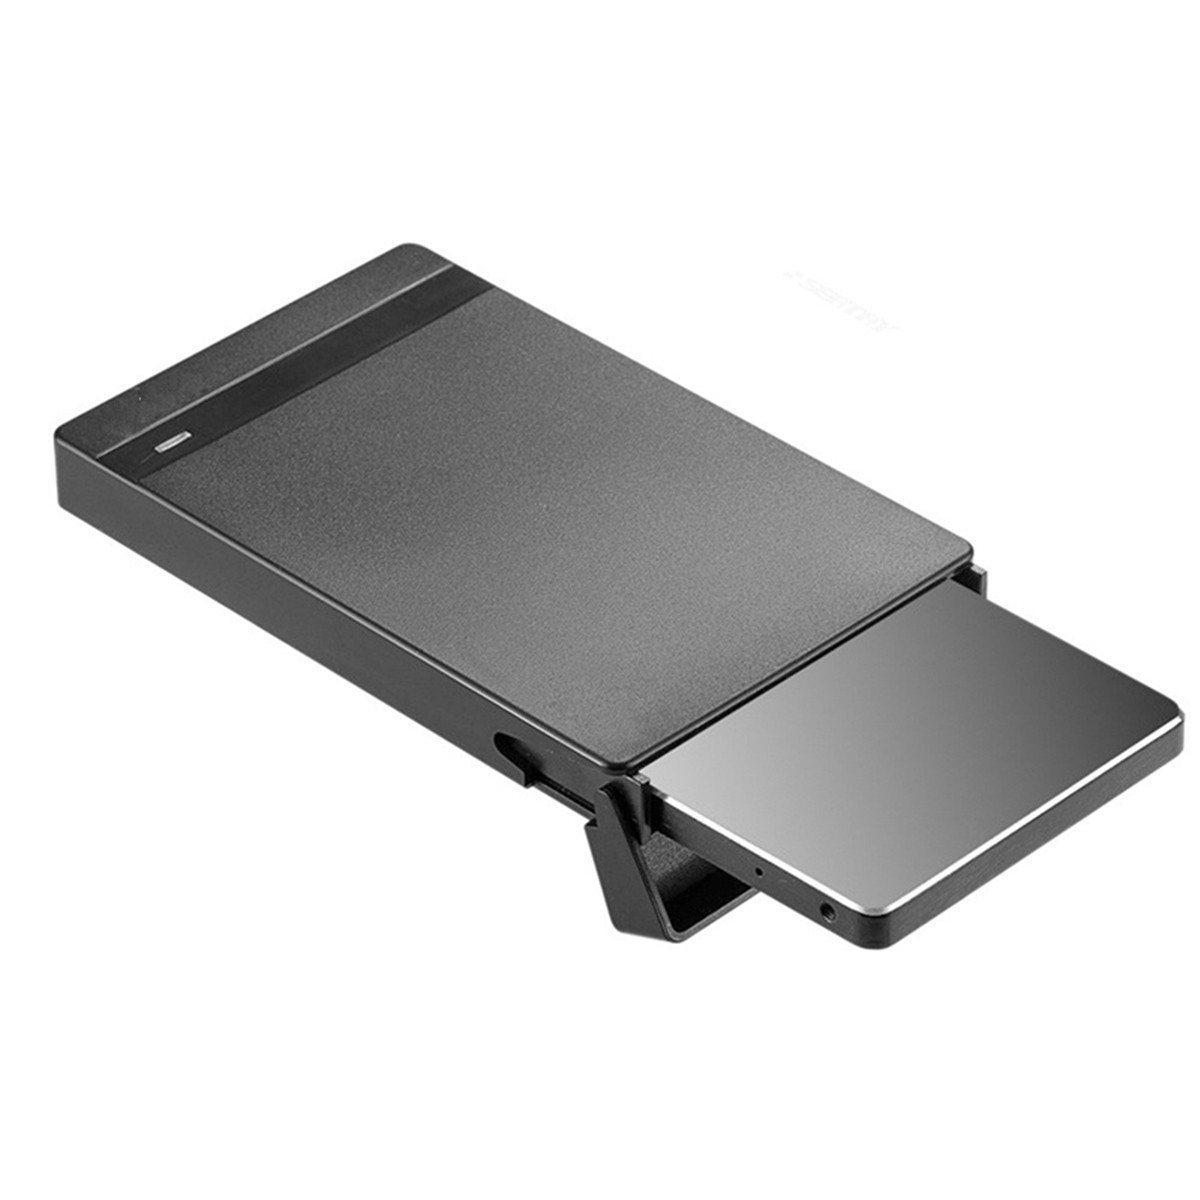 

2.5 Inch Tool-free USB3.0 SATA SSD Hard Drive Enclosure Solid State Drive External Case